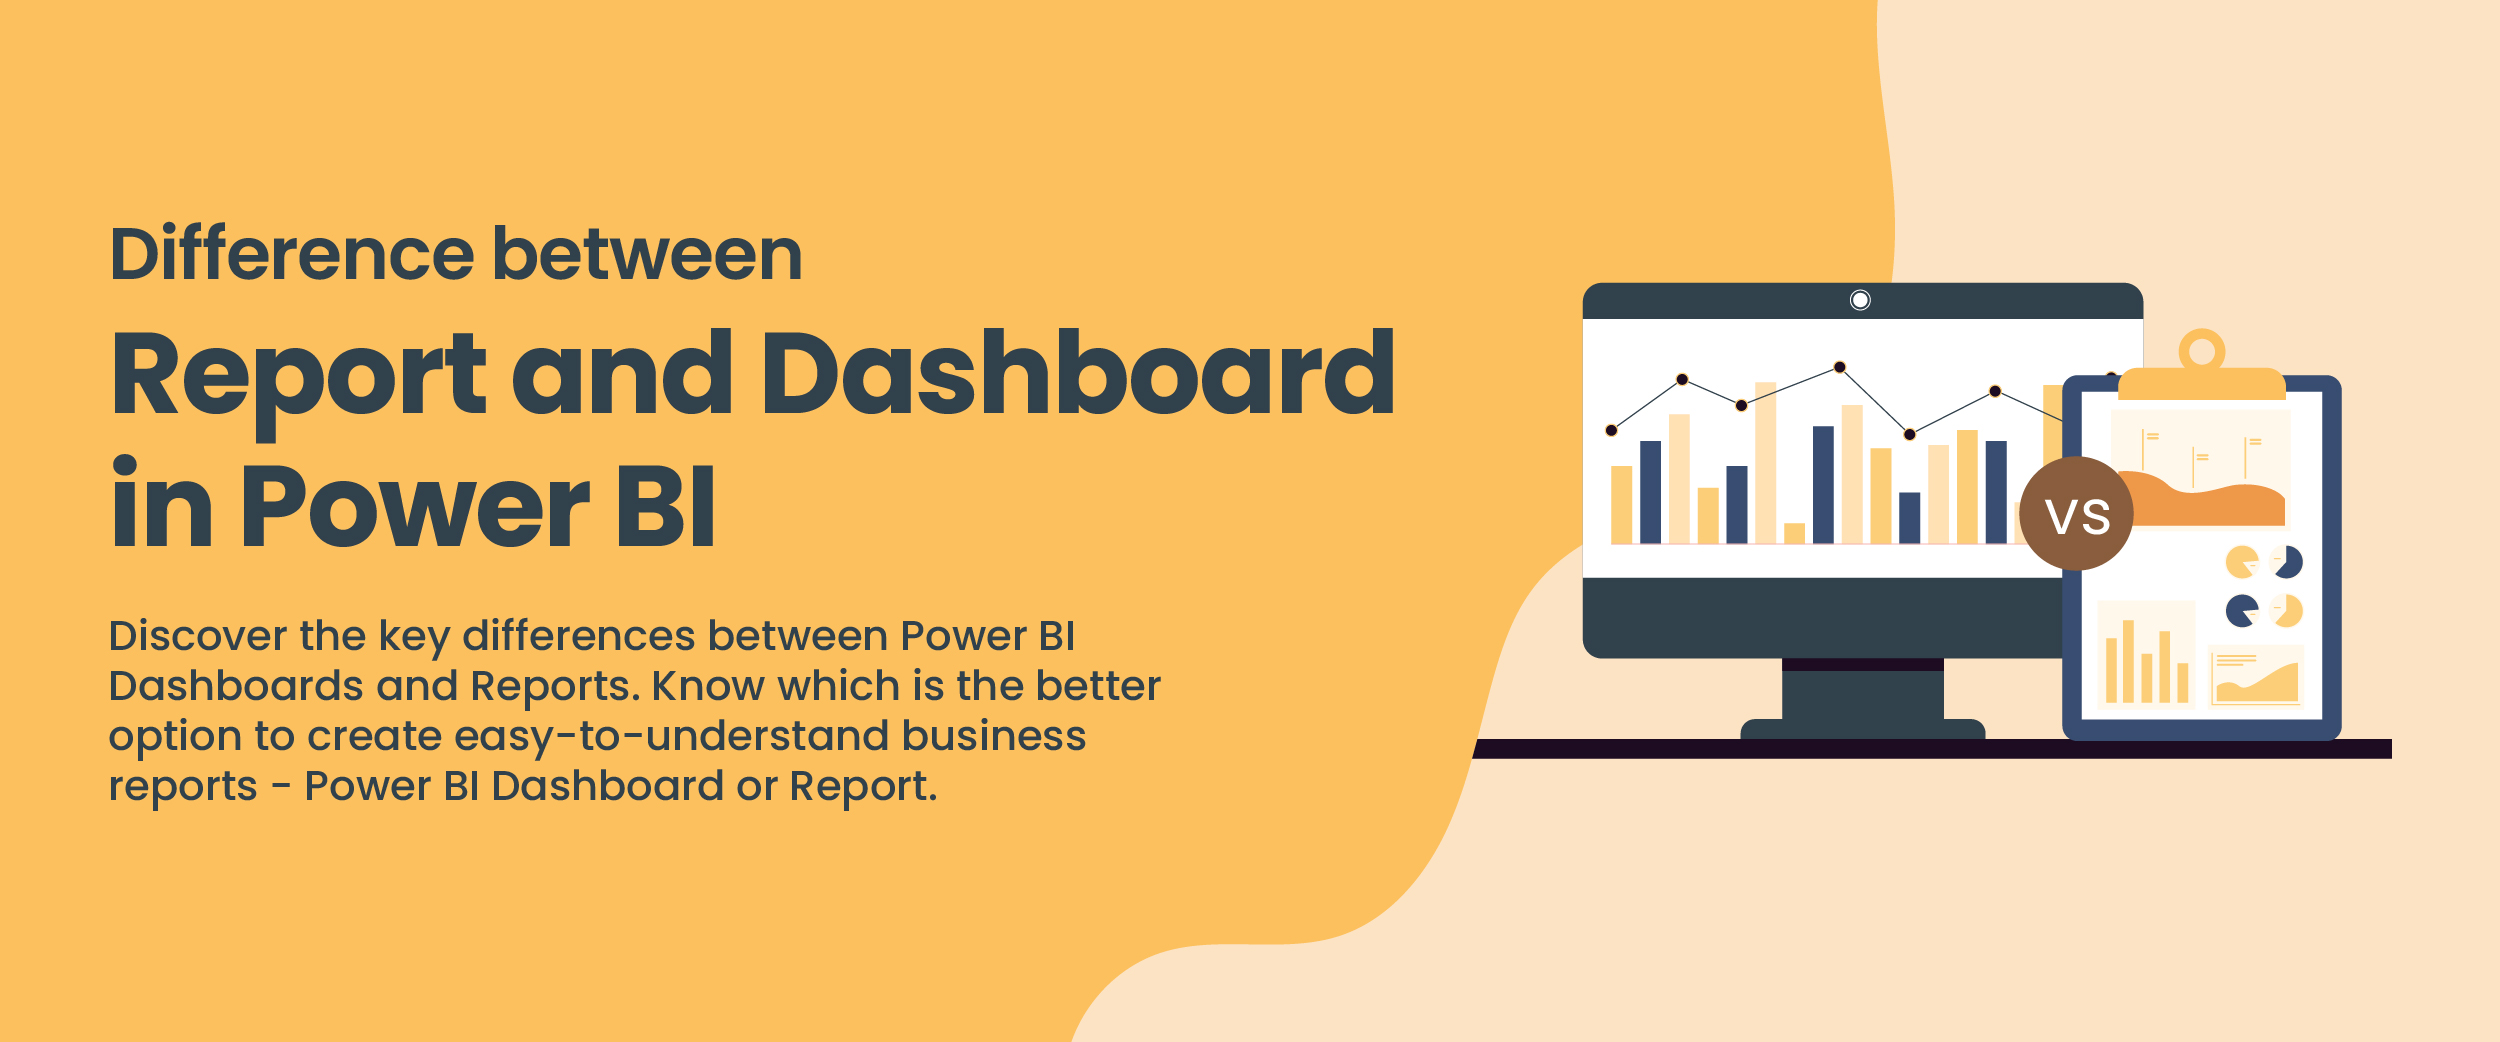 Difference between report and dashboard in Power BI